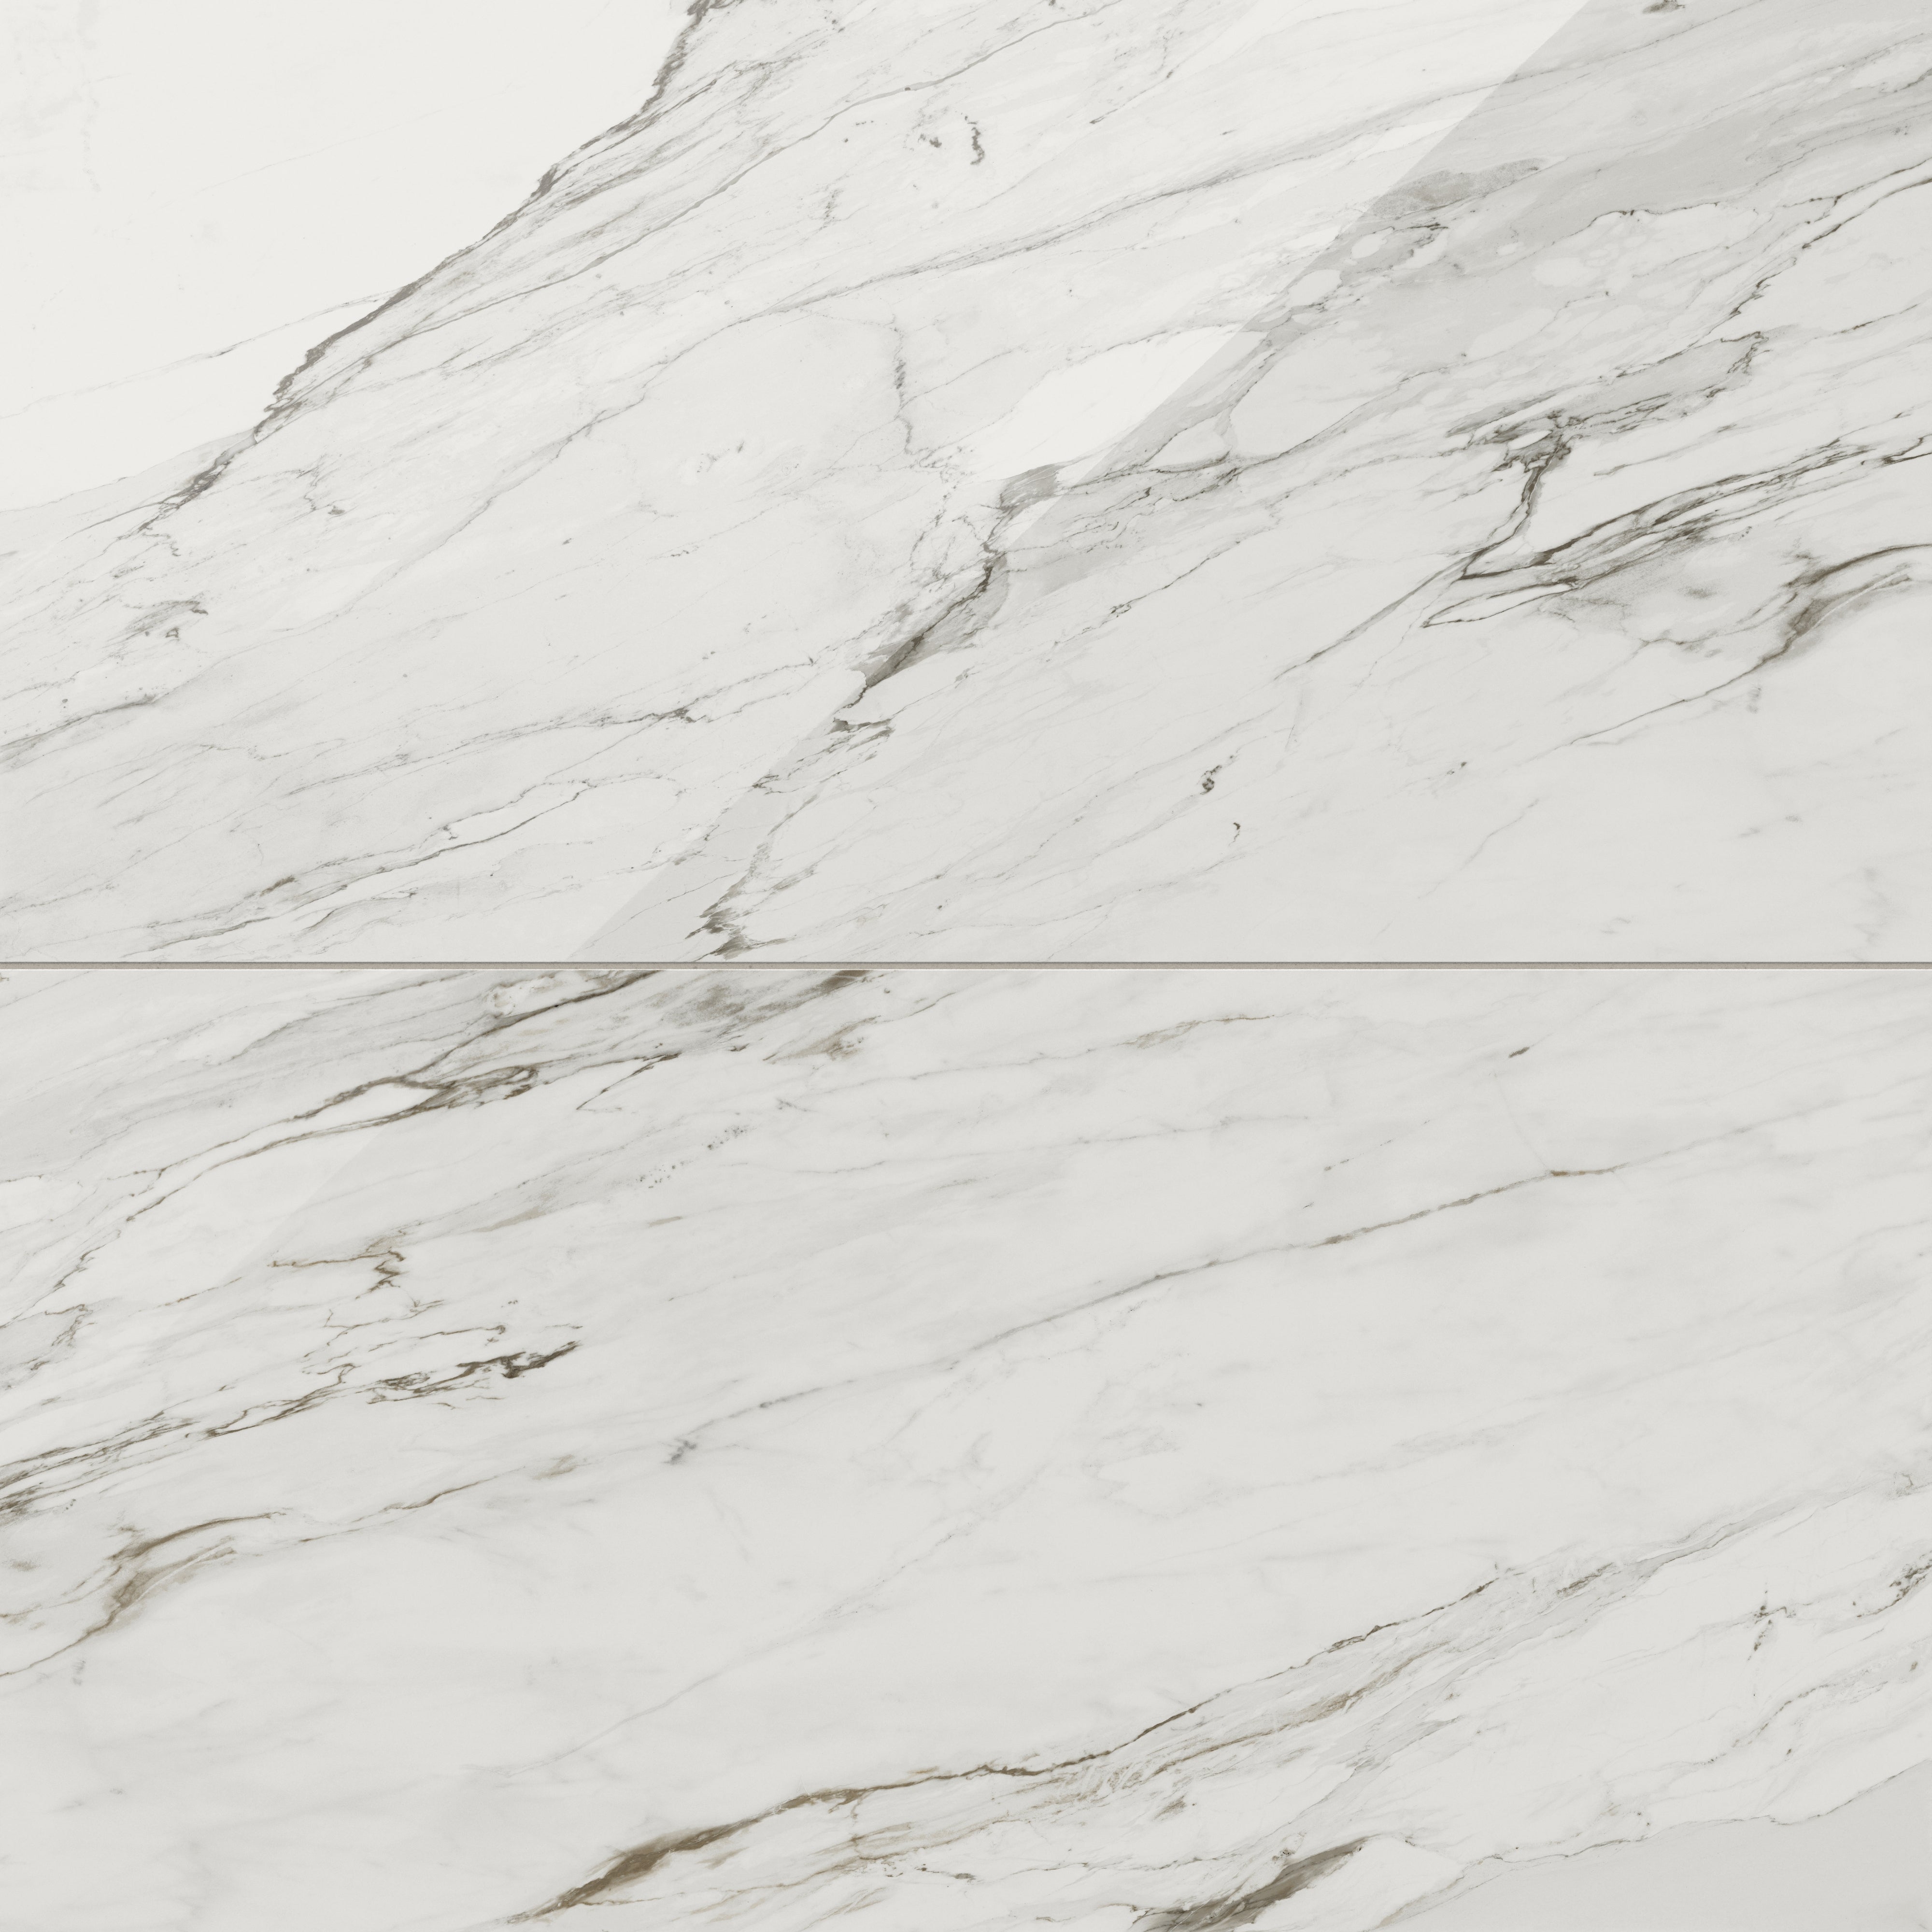 Chantel 24x48 Polished Porcelain Tile in Apuano